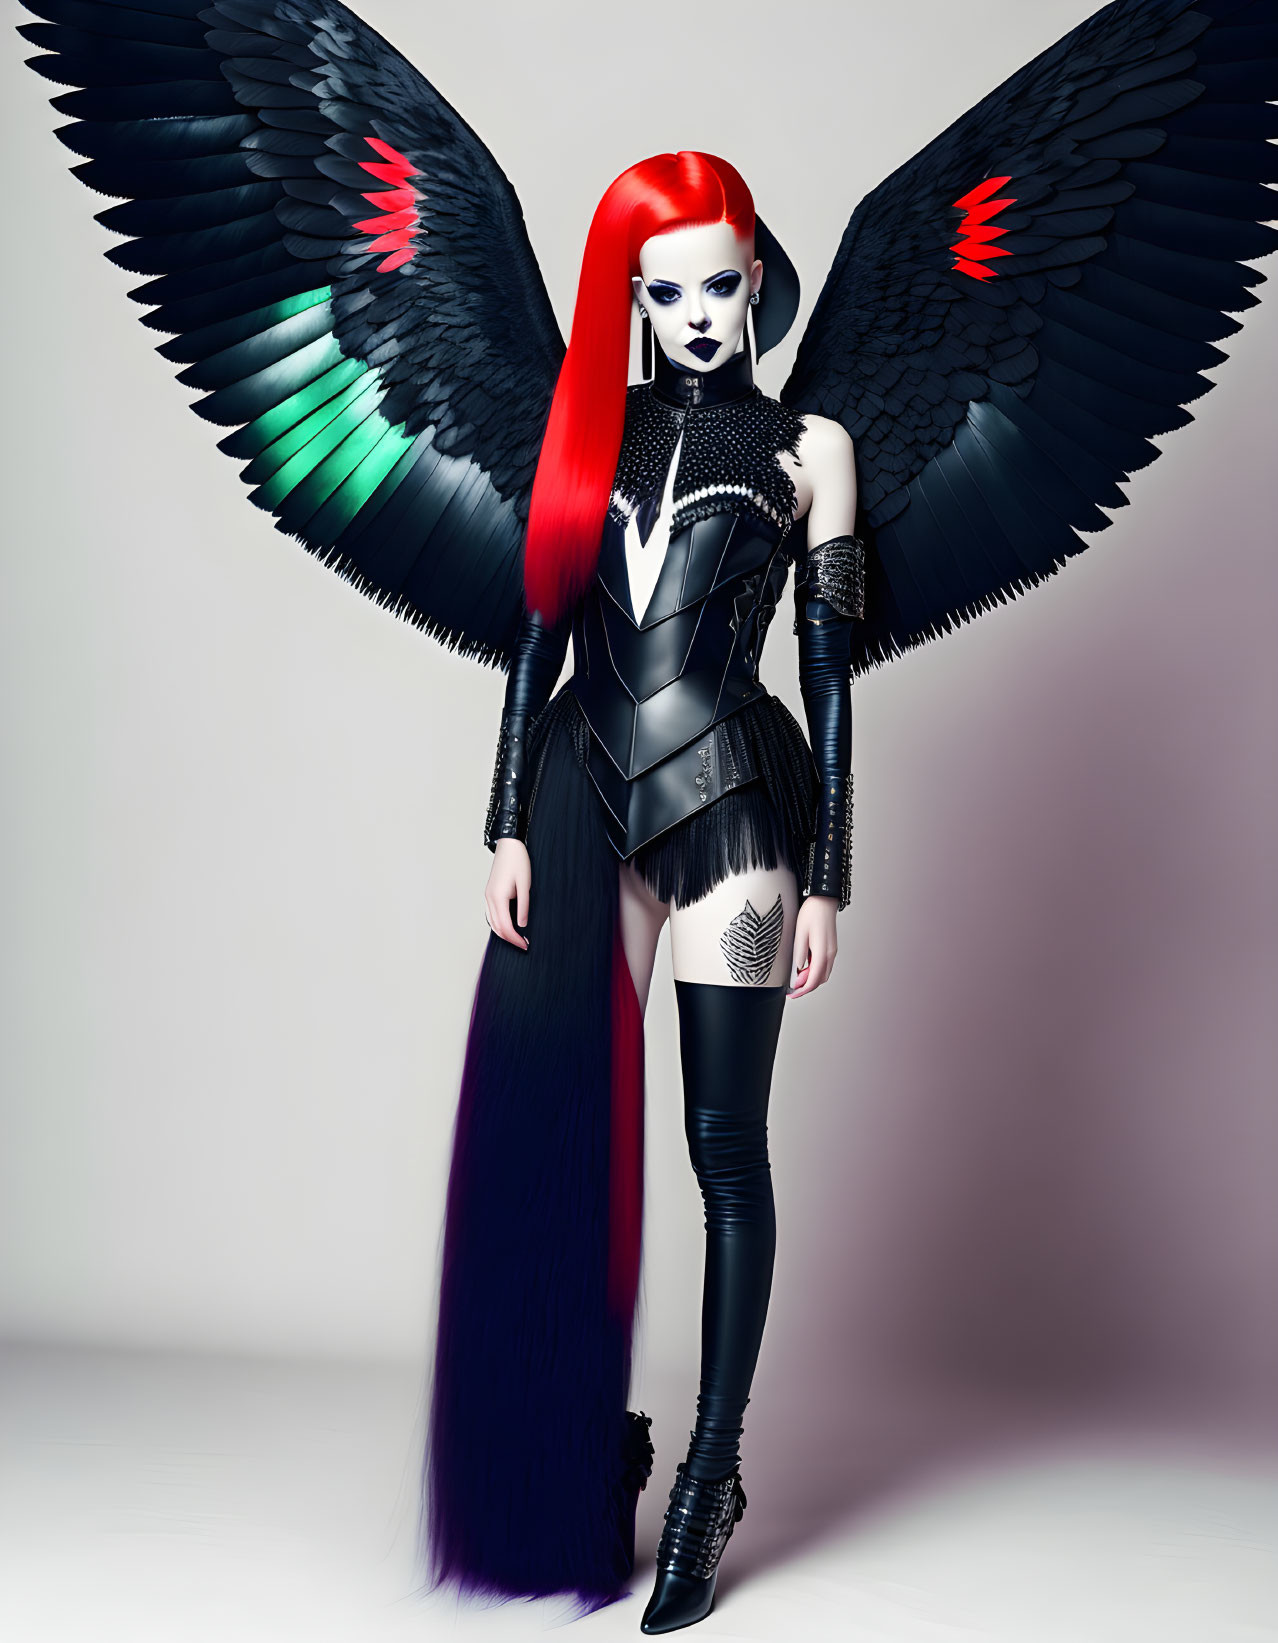 Red-haired person with black wings in gothic attire on light background